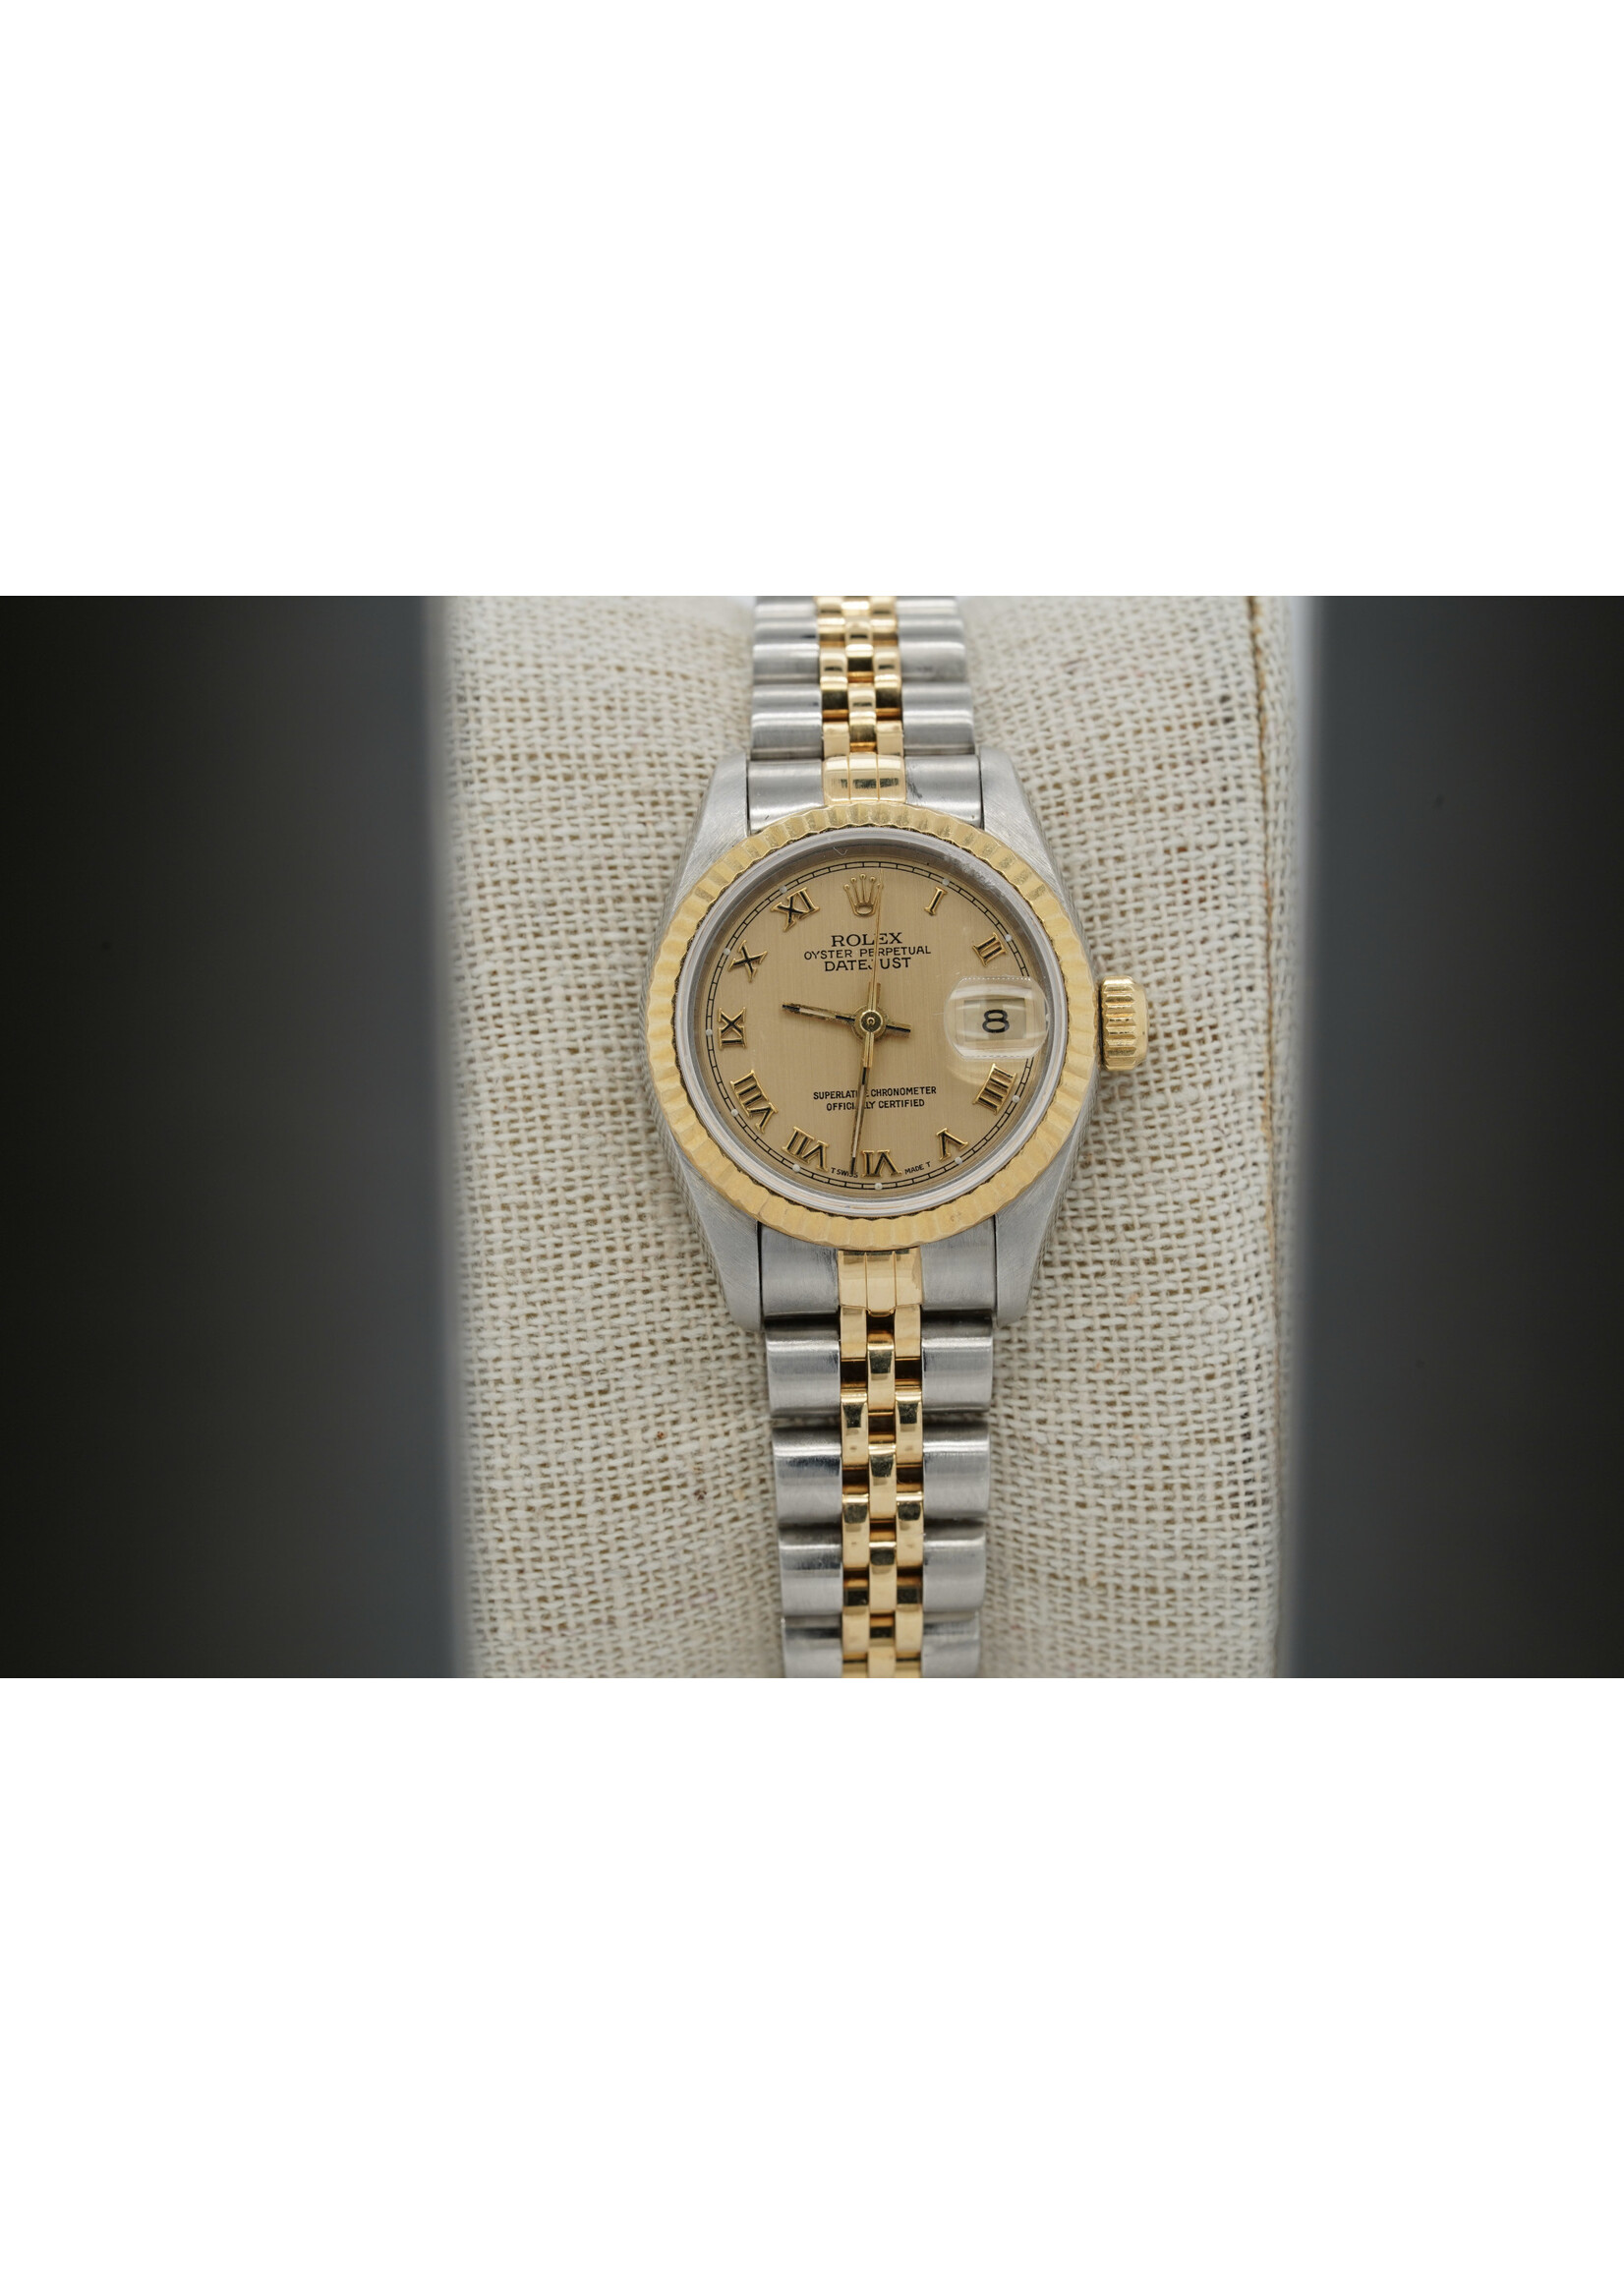 26mm Ladies Stainless/18KY Datejust Rolex Jubilee Band